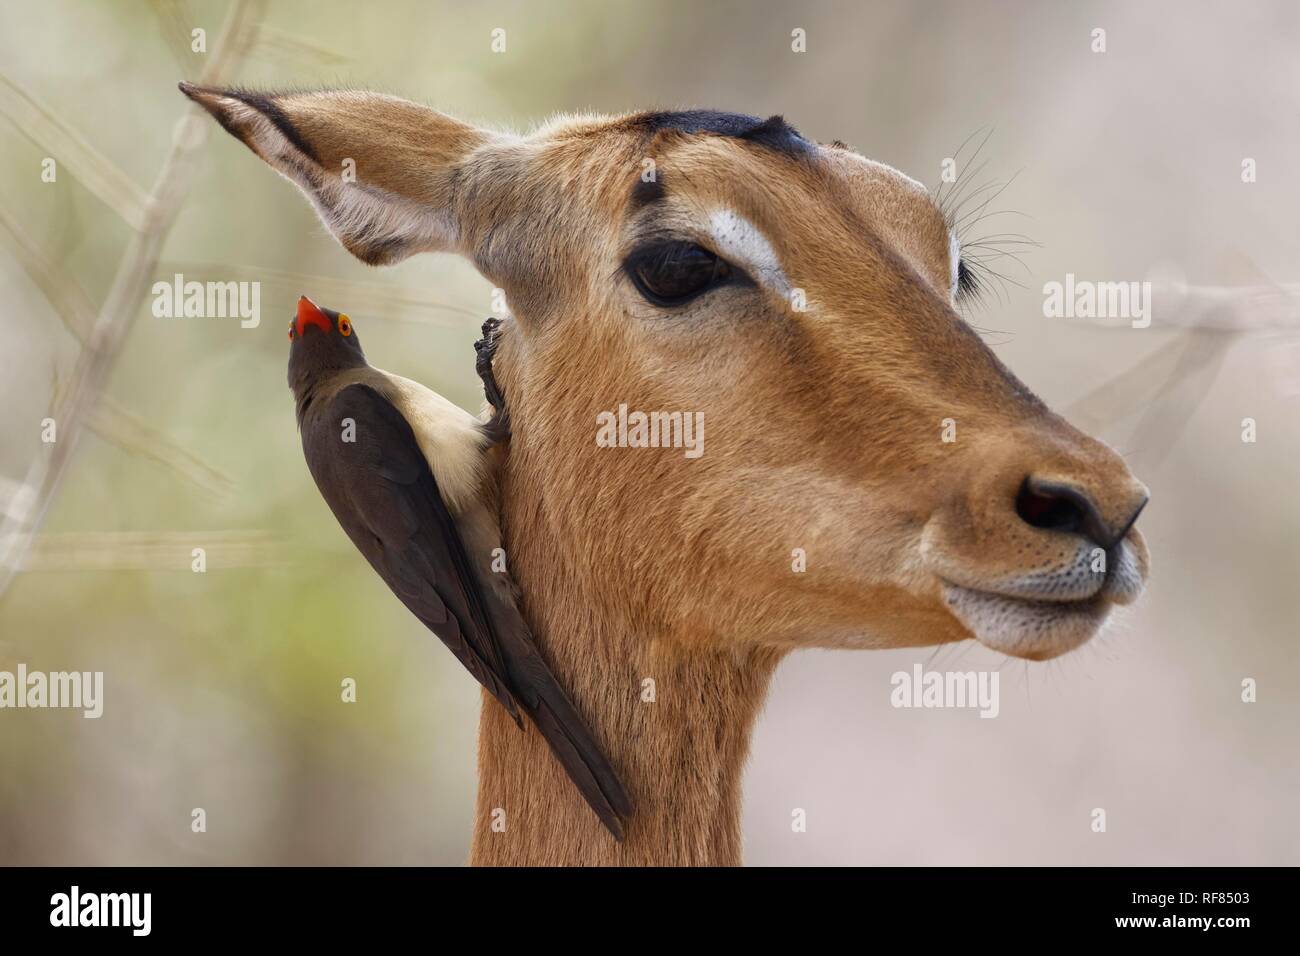 Red-billed oxpecker (Buphagus erythrorhynchus), hanging around the neck of a female impala (Aepyceros melampus) Stock Photo